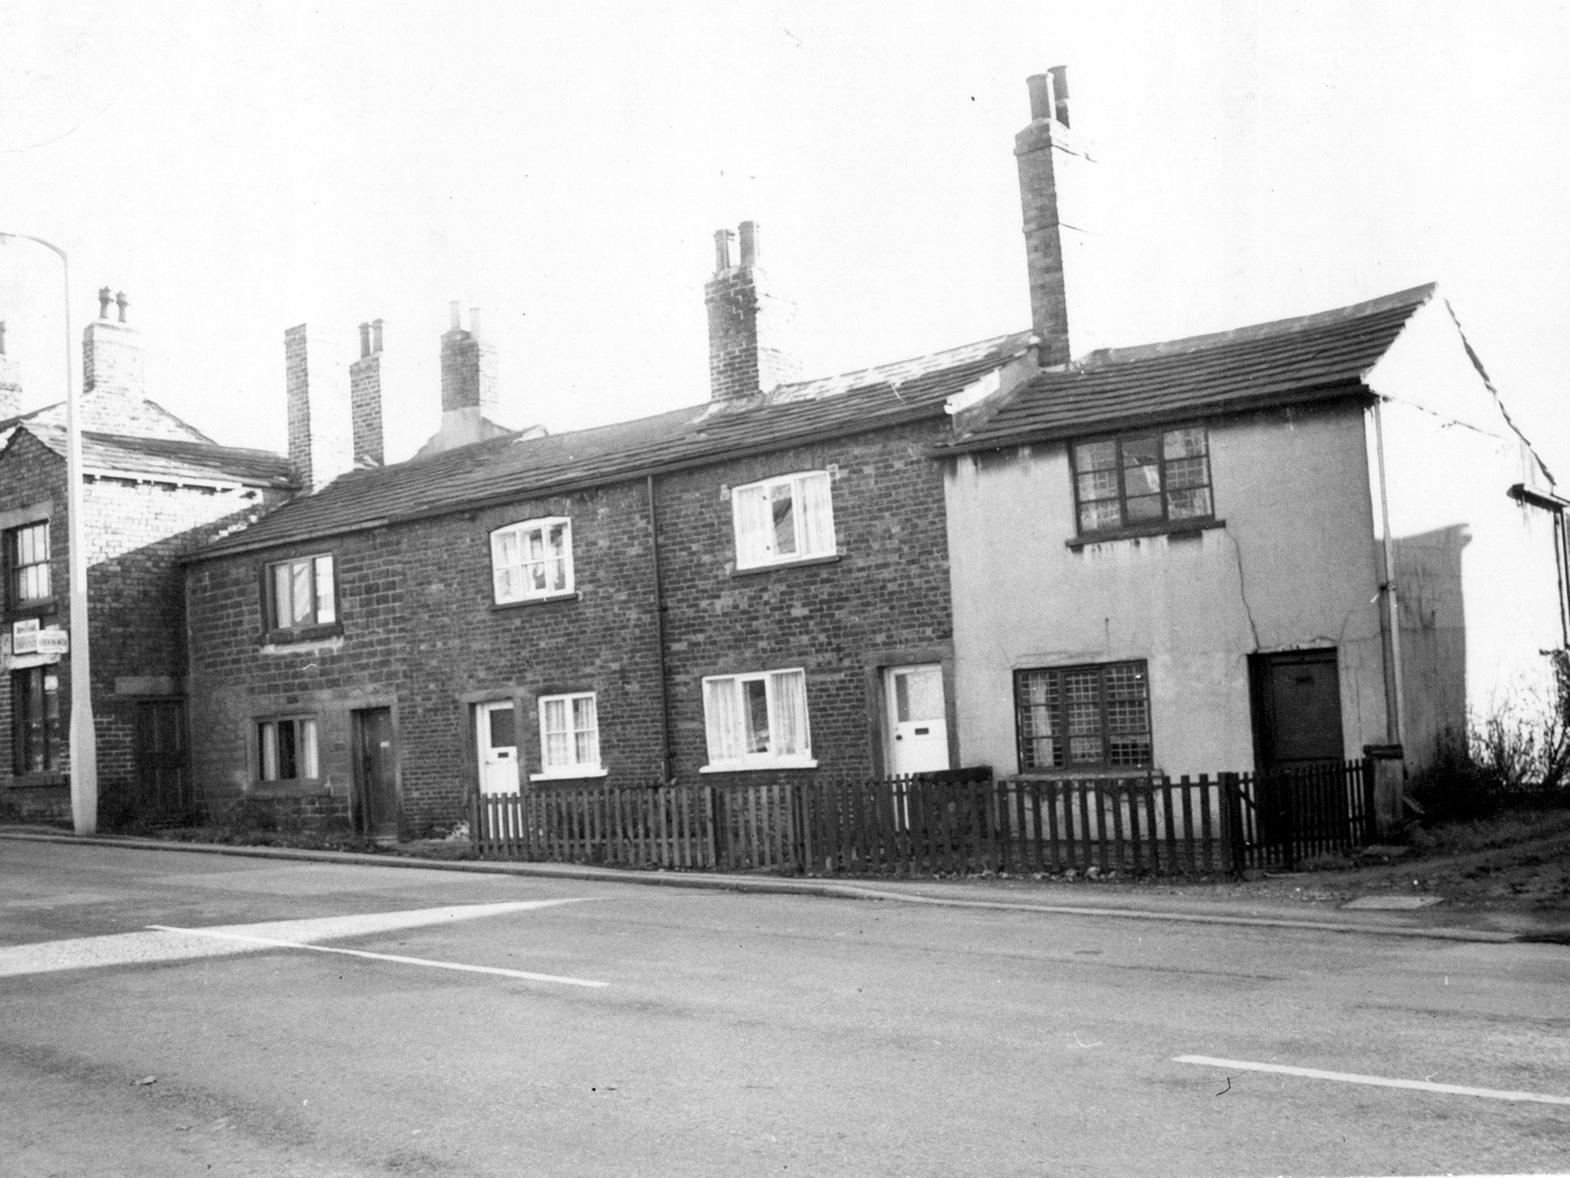 Town Street, Gildersome. Brick built terraced houses with a shop, possibly a cycle repair shop, is to the far left of the photograph.